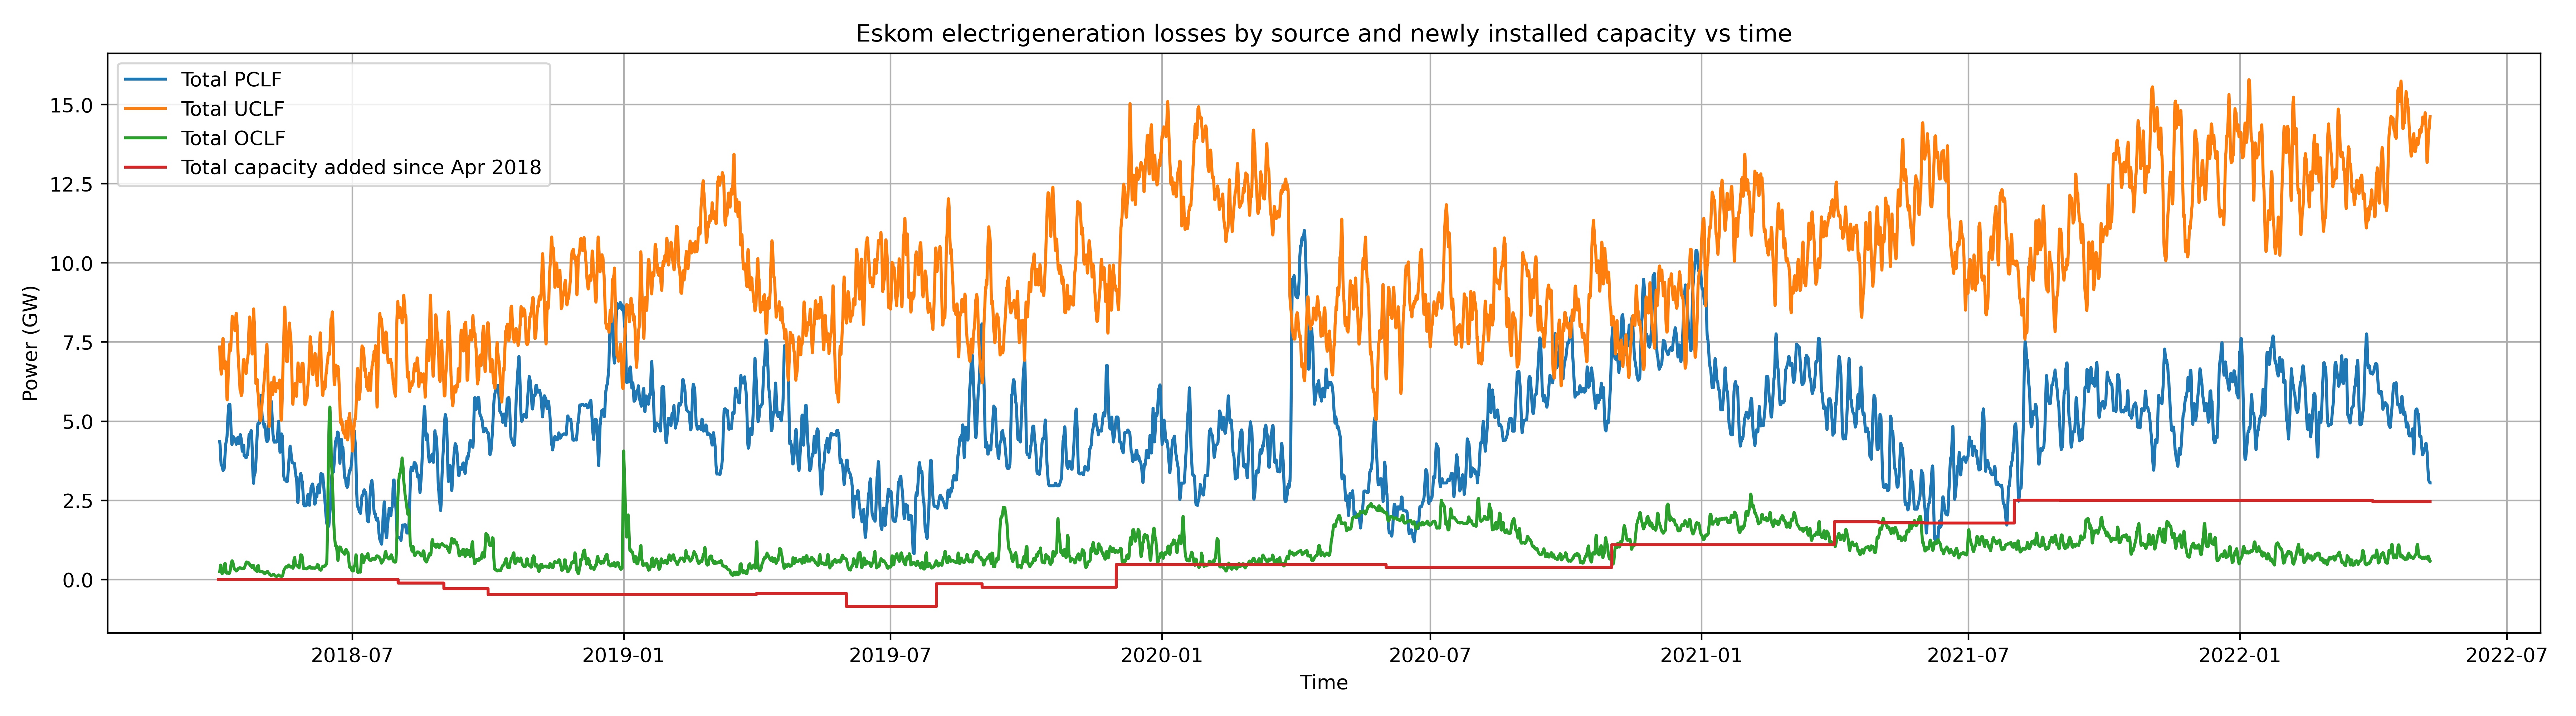 electricity losses